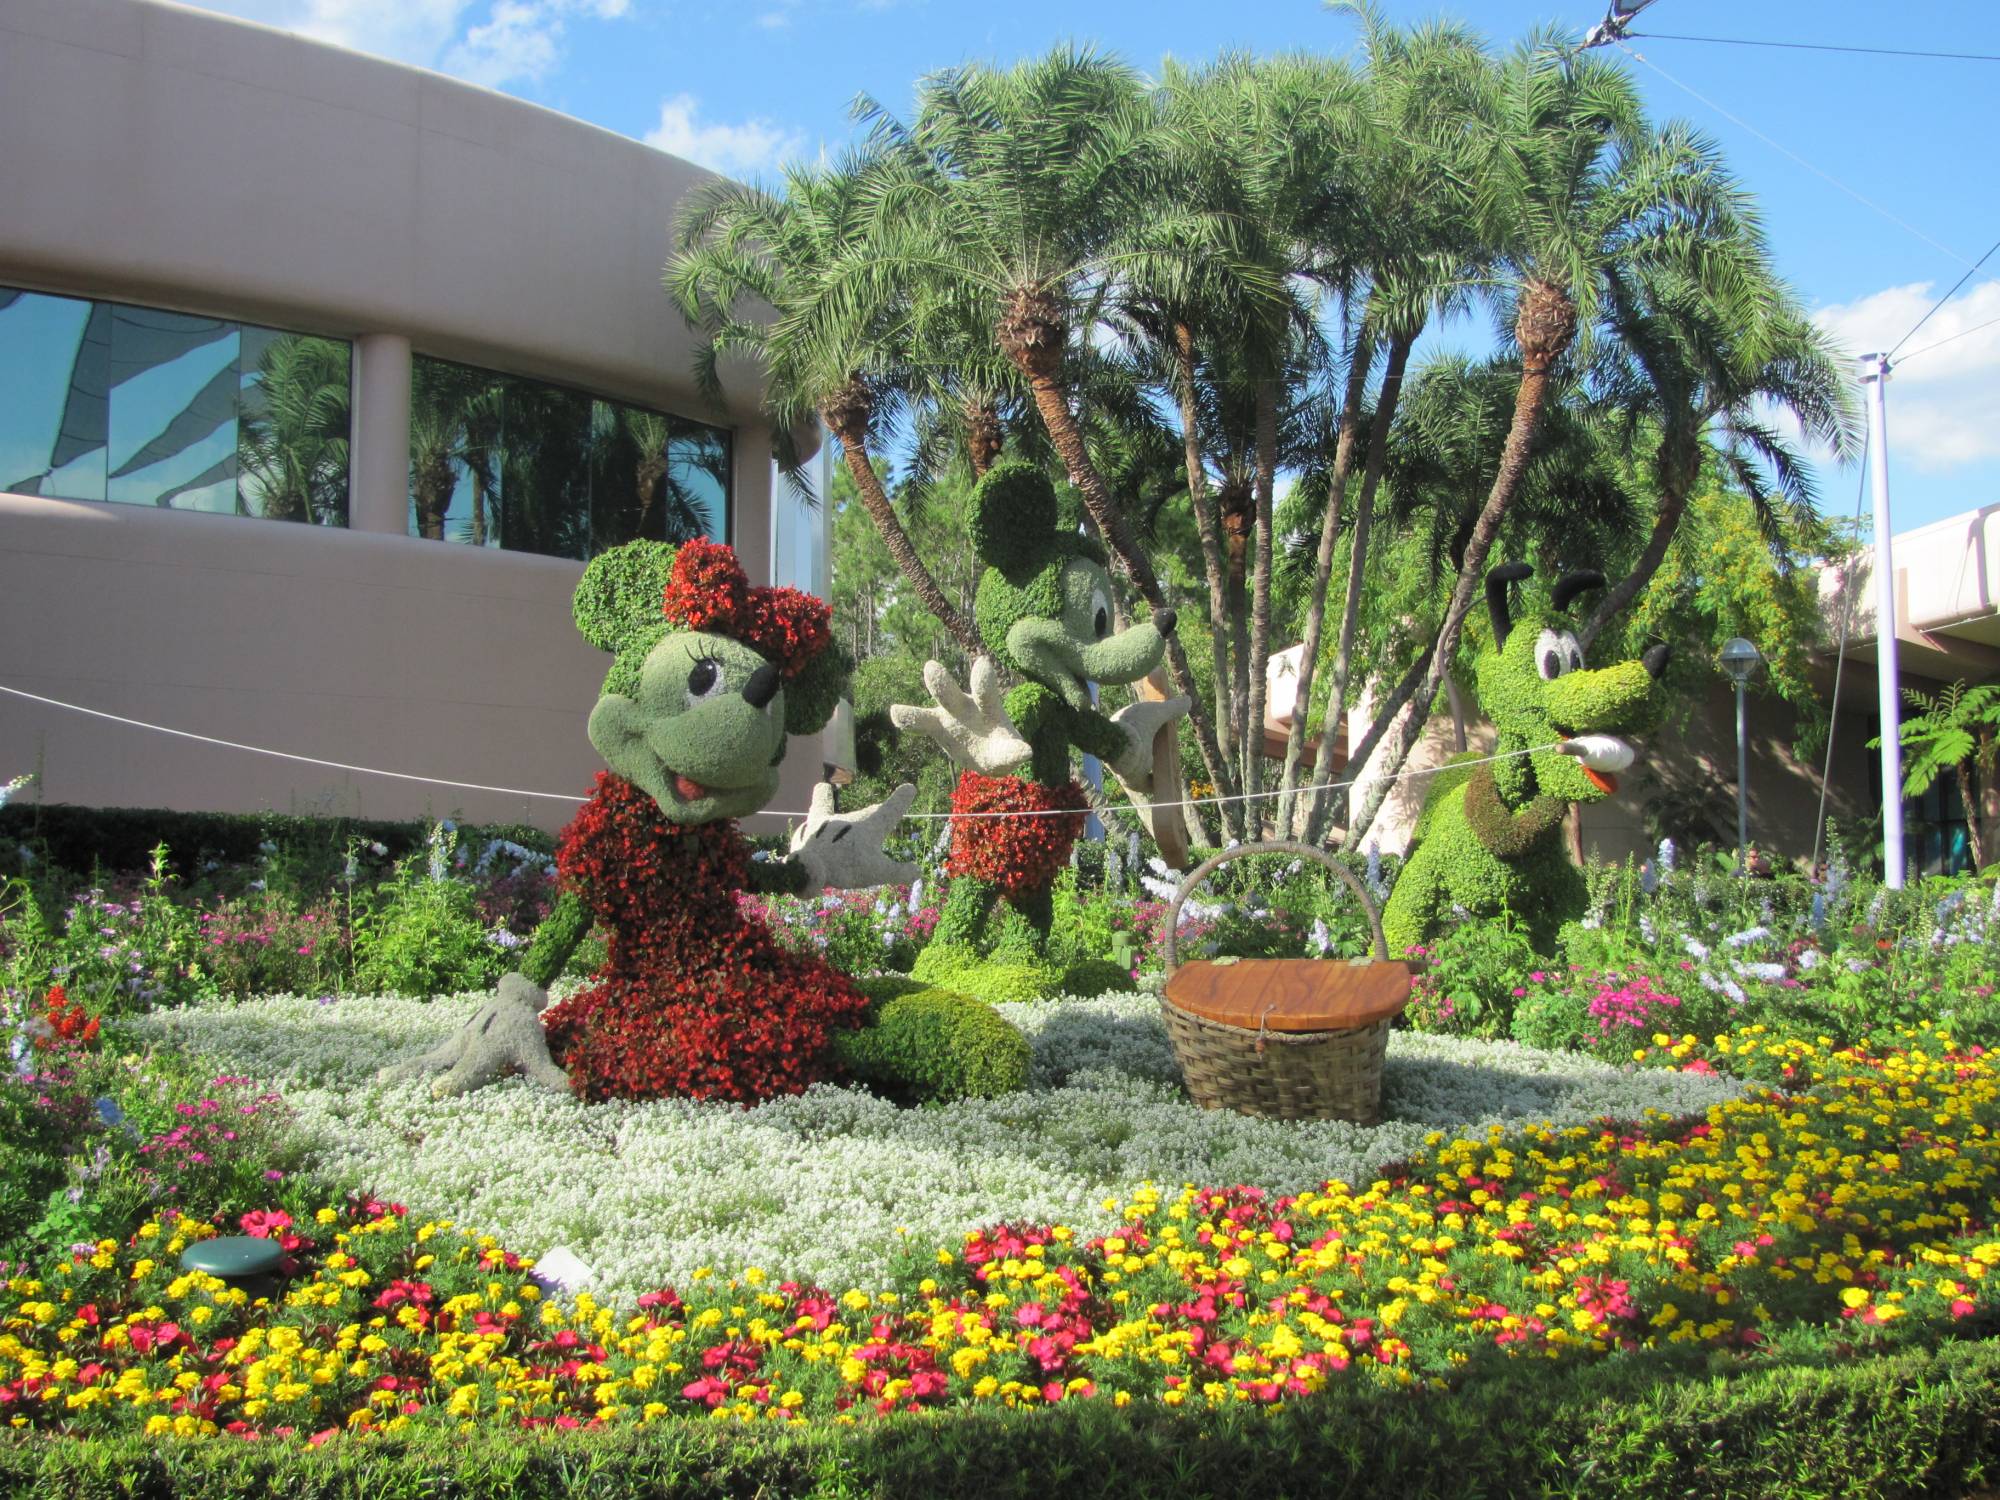 Picnicing at Epcot Flower and Garden Festival